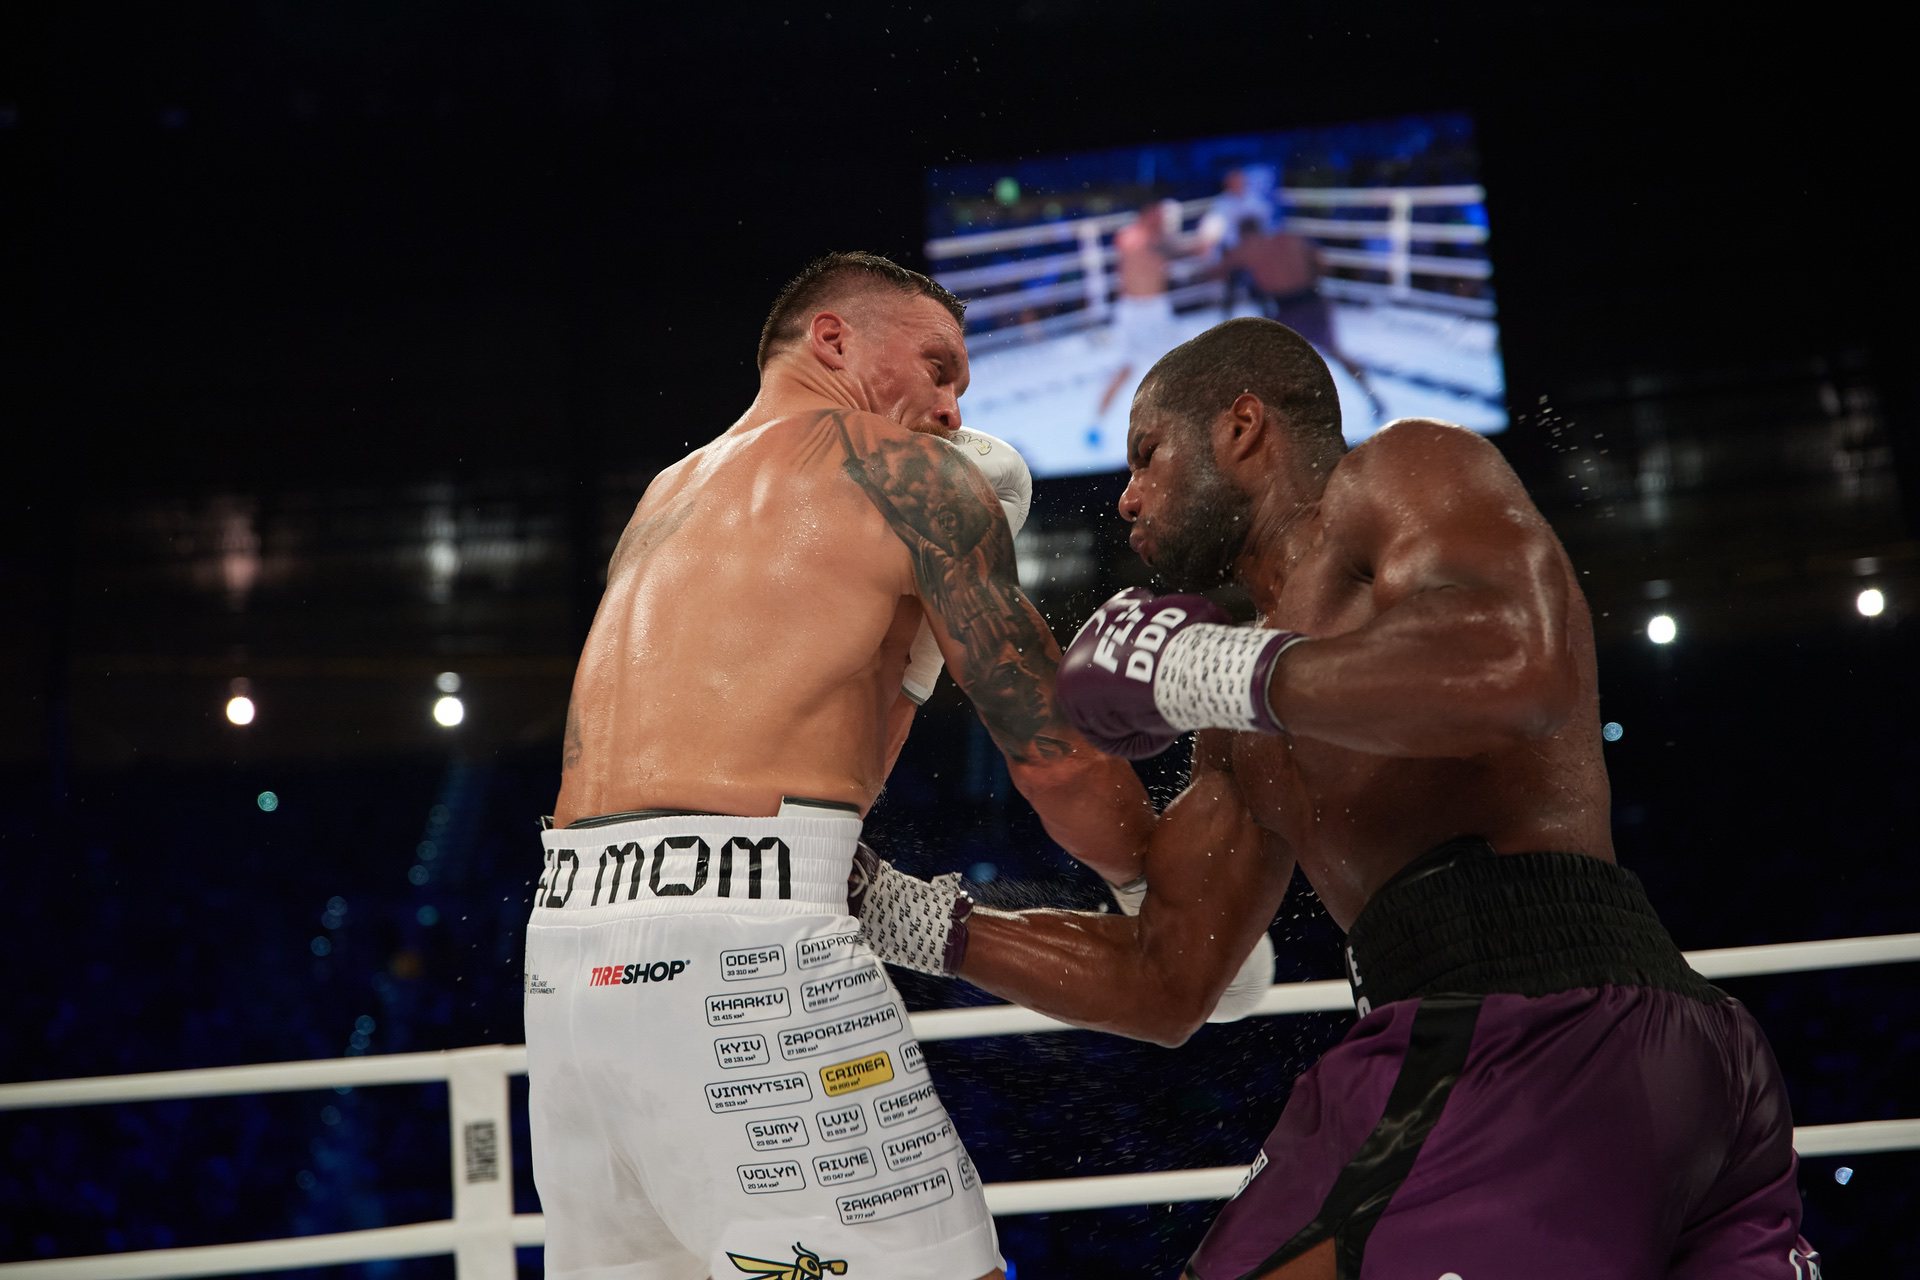 'I was three feet away from the action' – Barry Jones reviews Usyk-Dubois controversy 